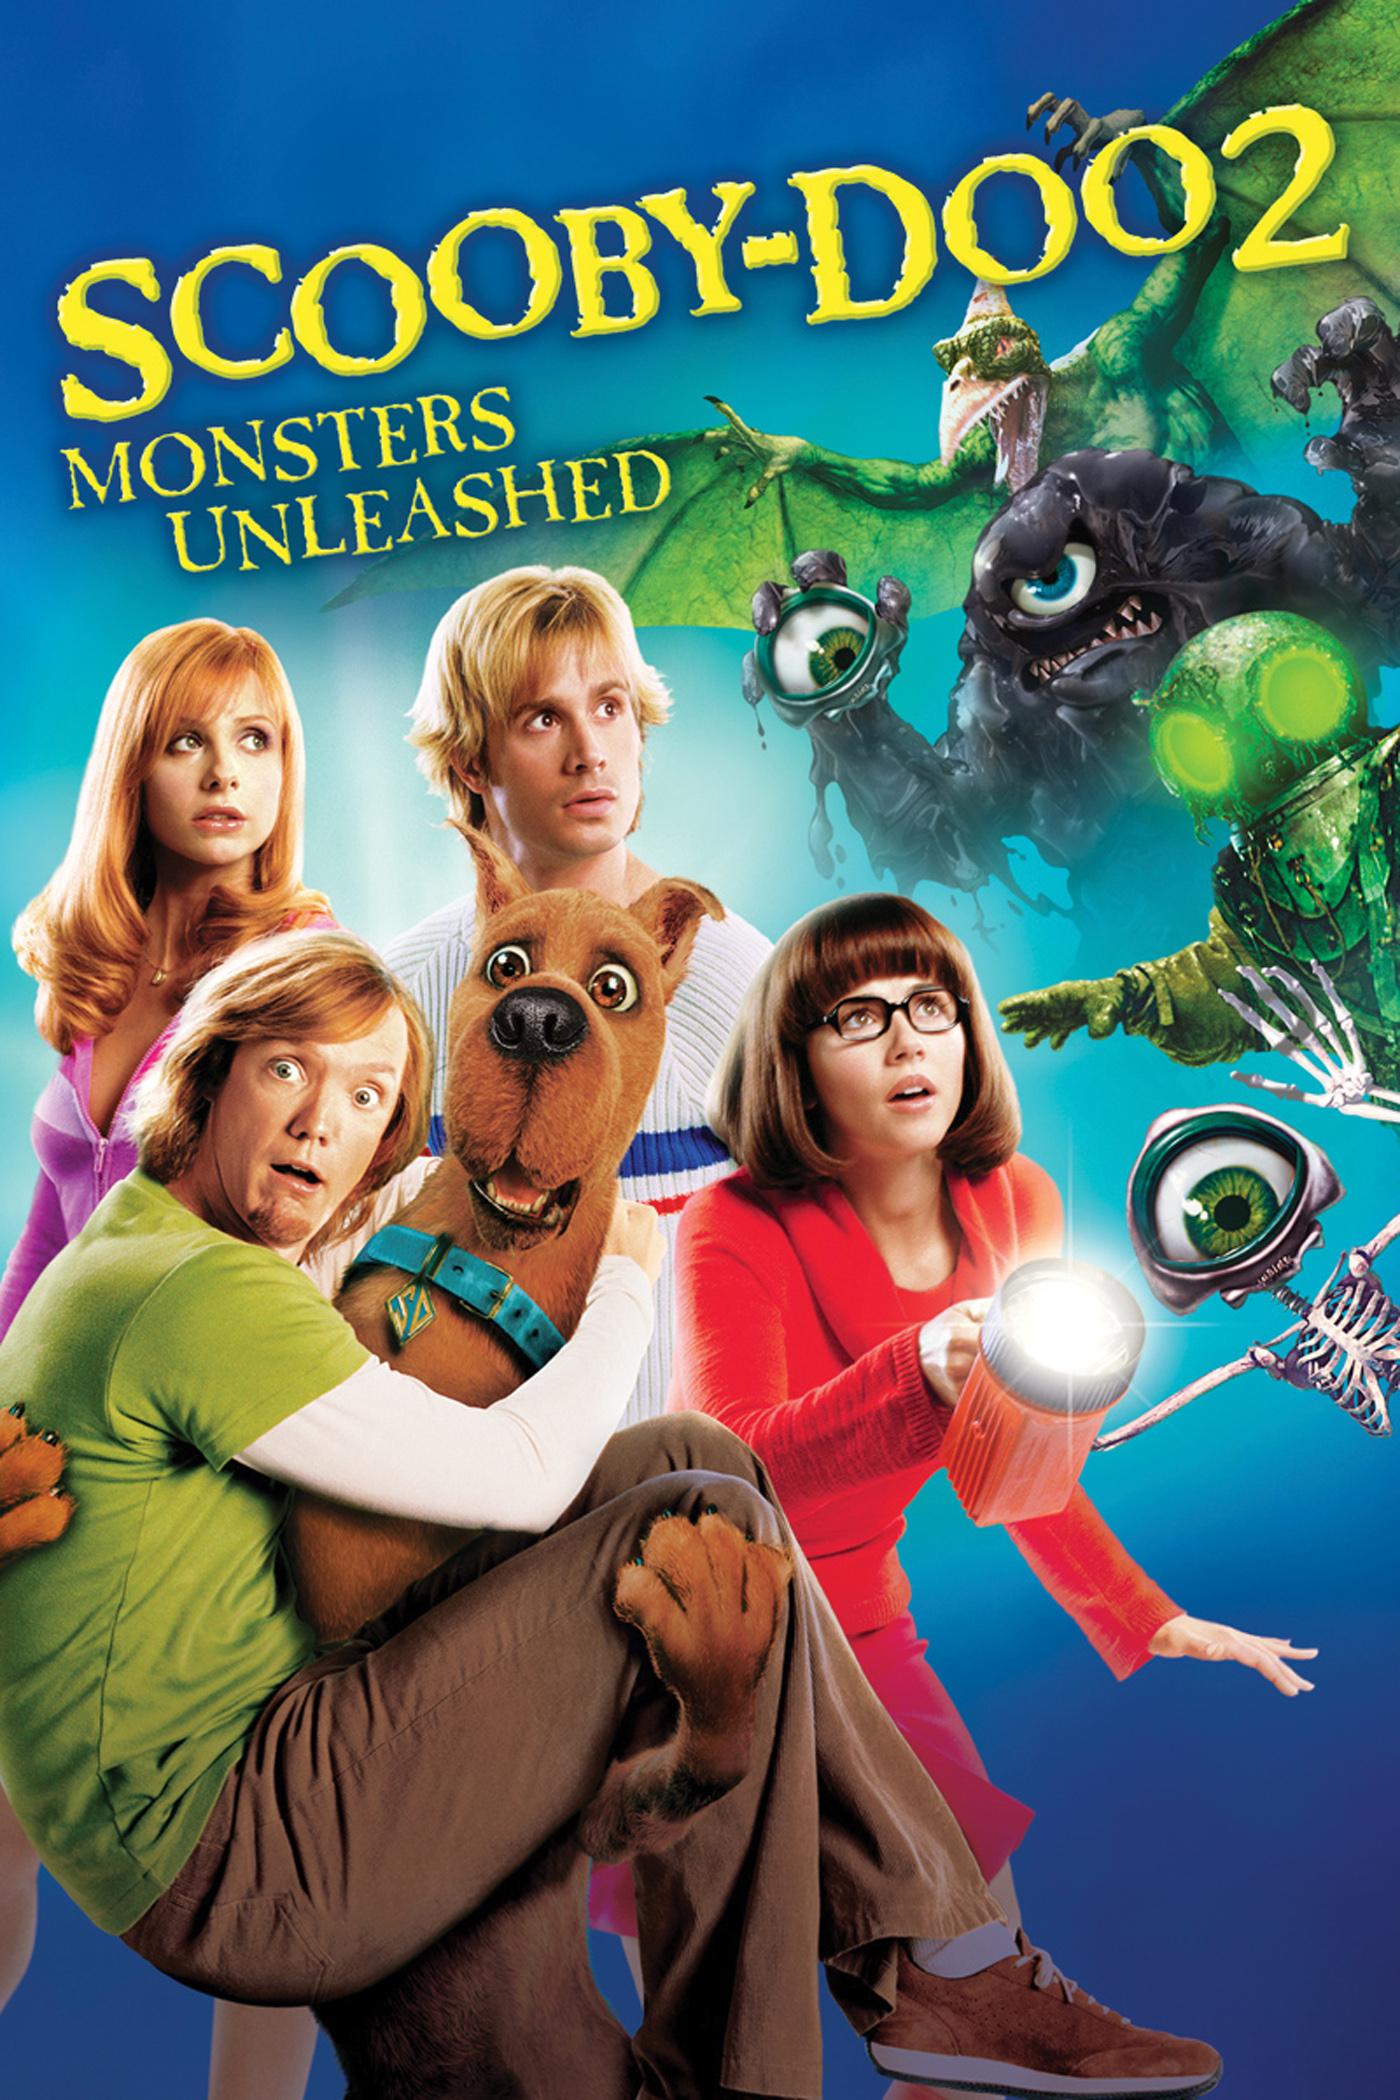 Scooby doo 2 monsters unleashed characters - brodoggy